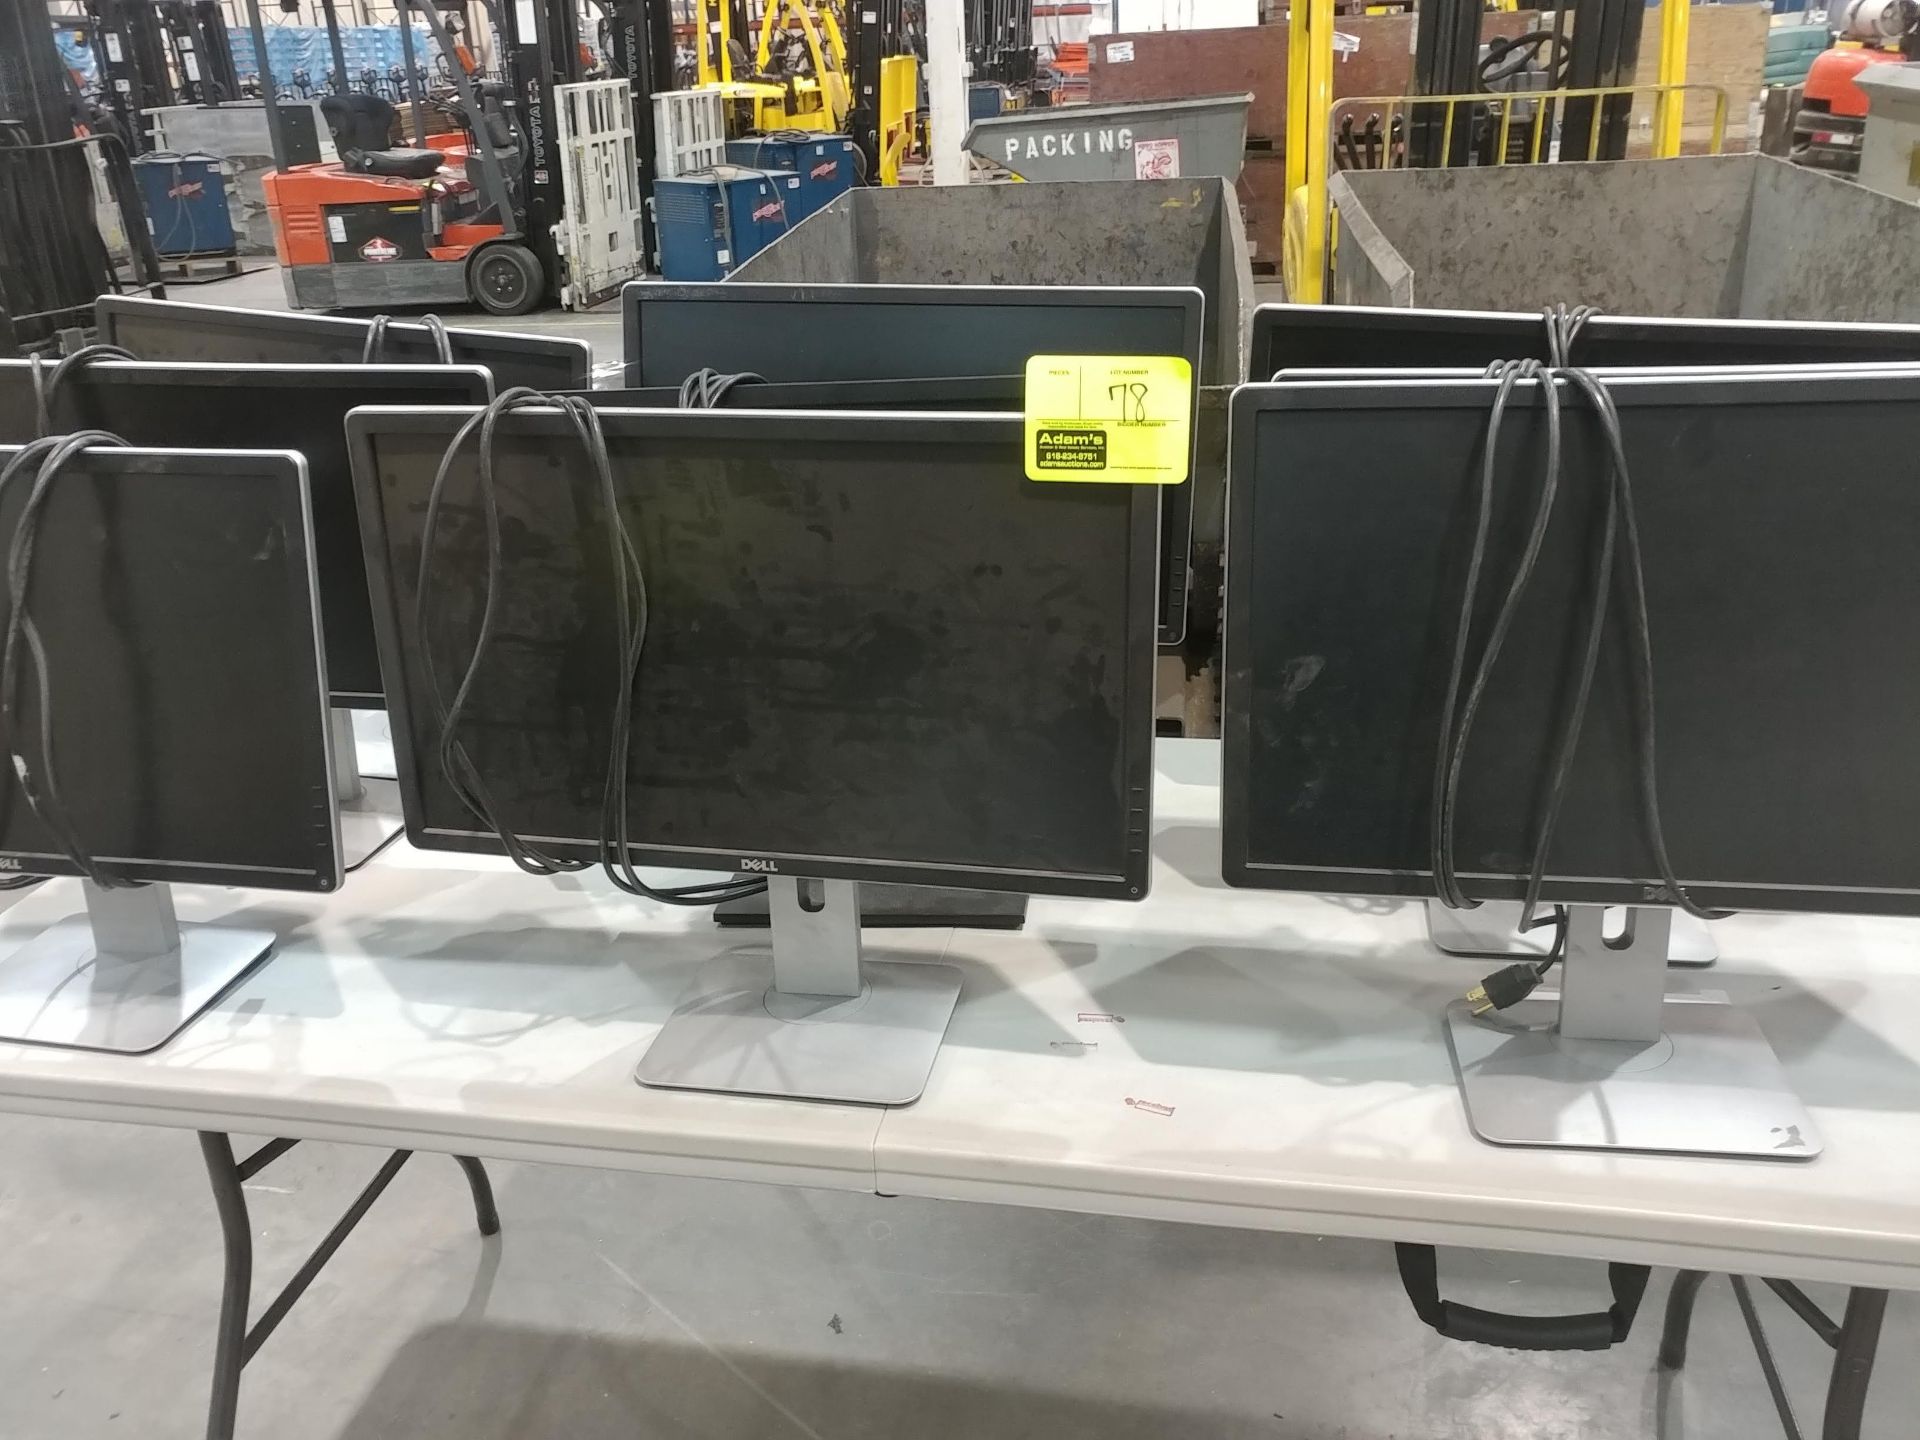 Table of monitors